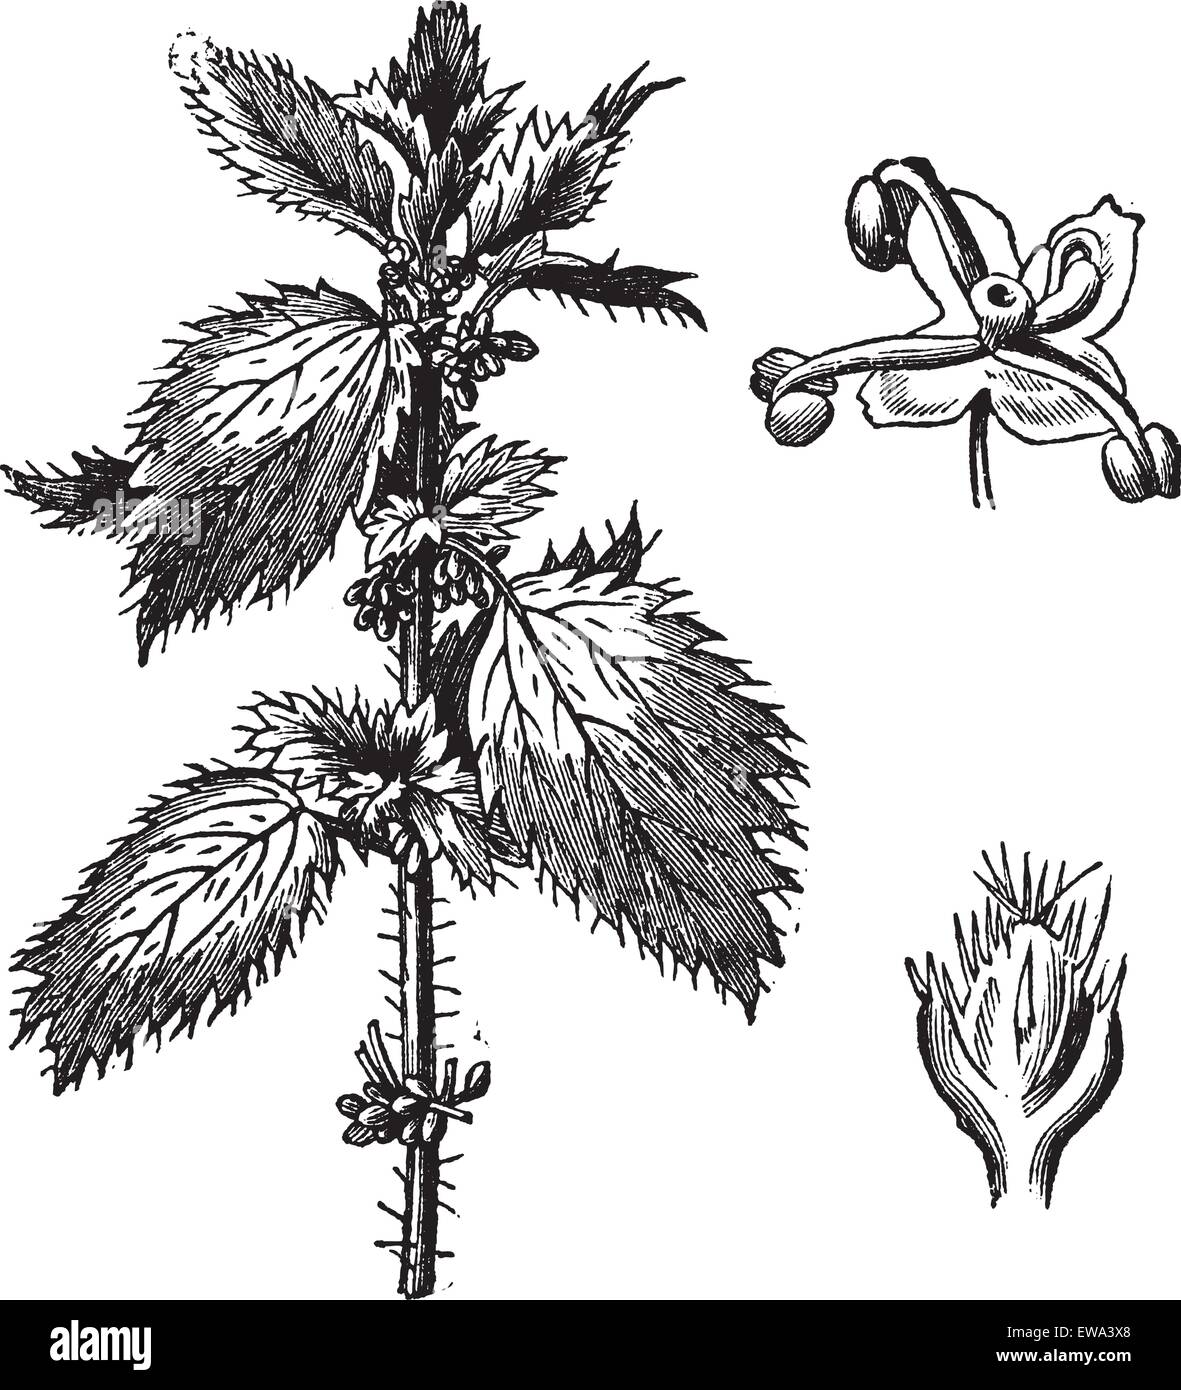 Stinging nettle or Urtica urens, with the staminate flowers and pistillate flowers, vintage engraved illustration. Trousset encyclopedia (1886 - 1891). Stock Vector